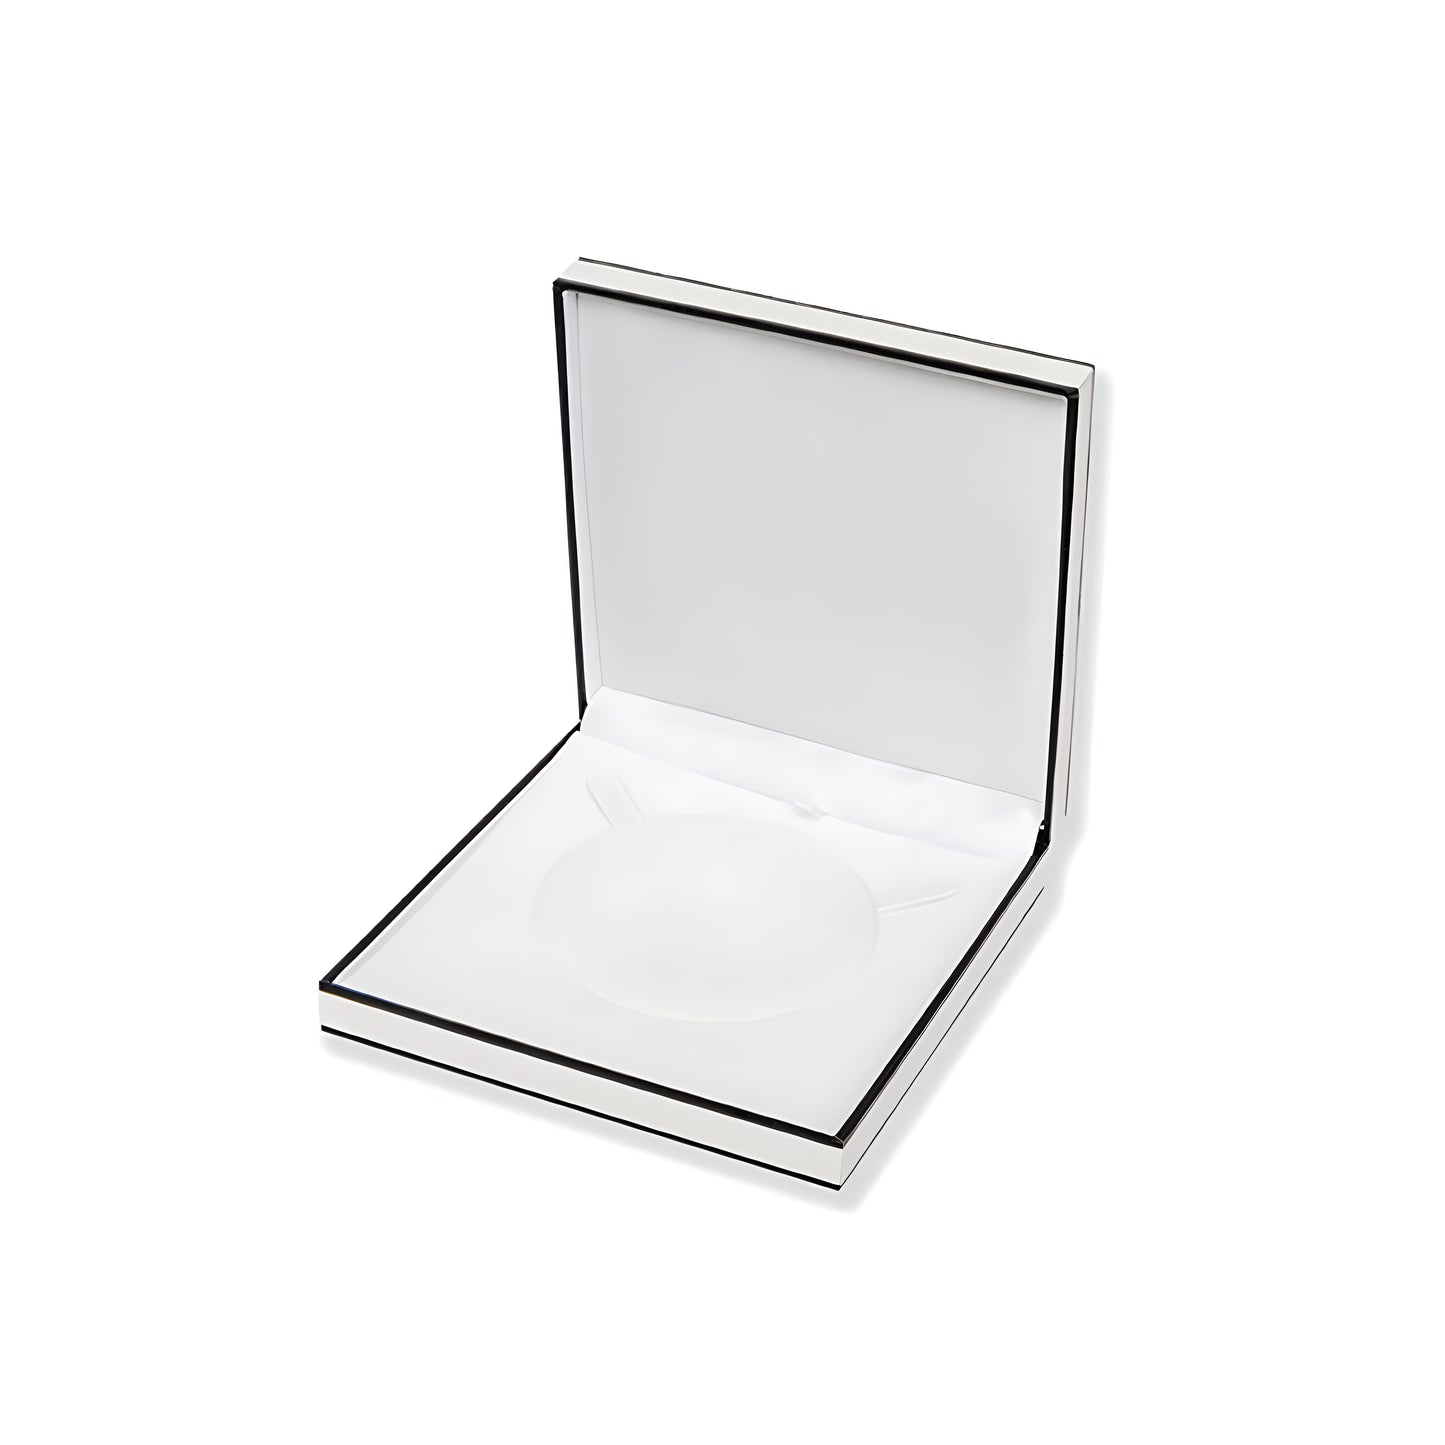 Monza Collar Boxes (Pack of 6)